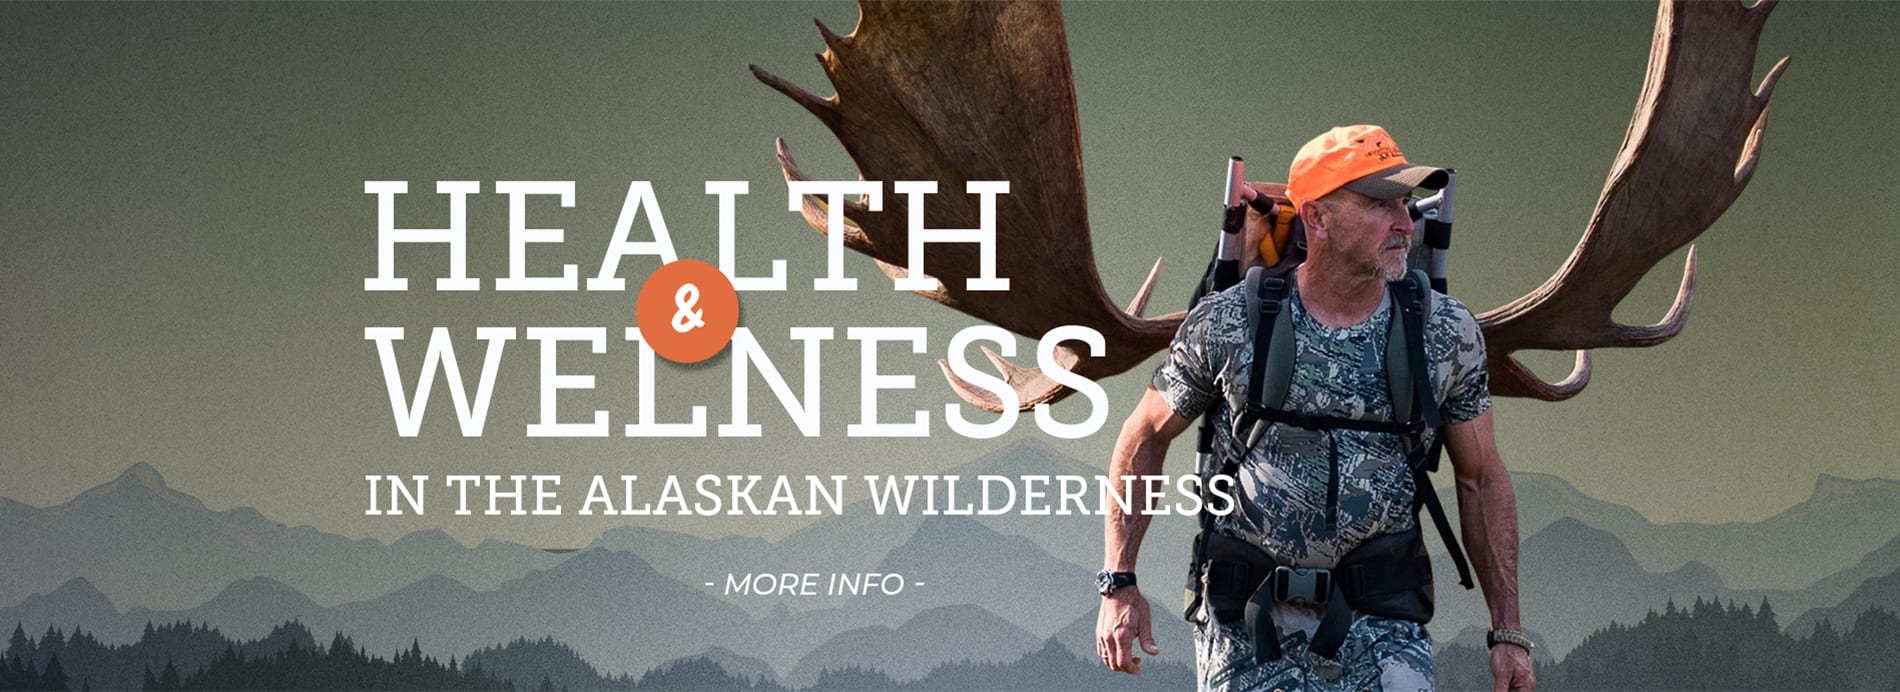 "Health & Wellness in the Alaskan Wilderness" : Click for more info